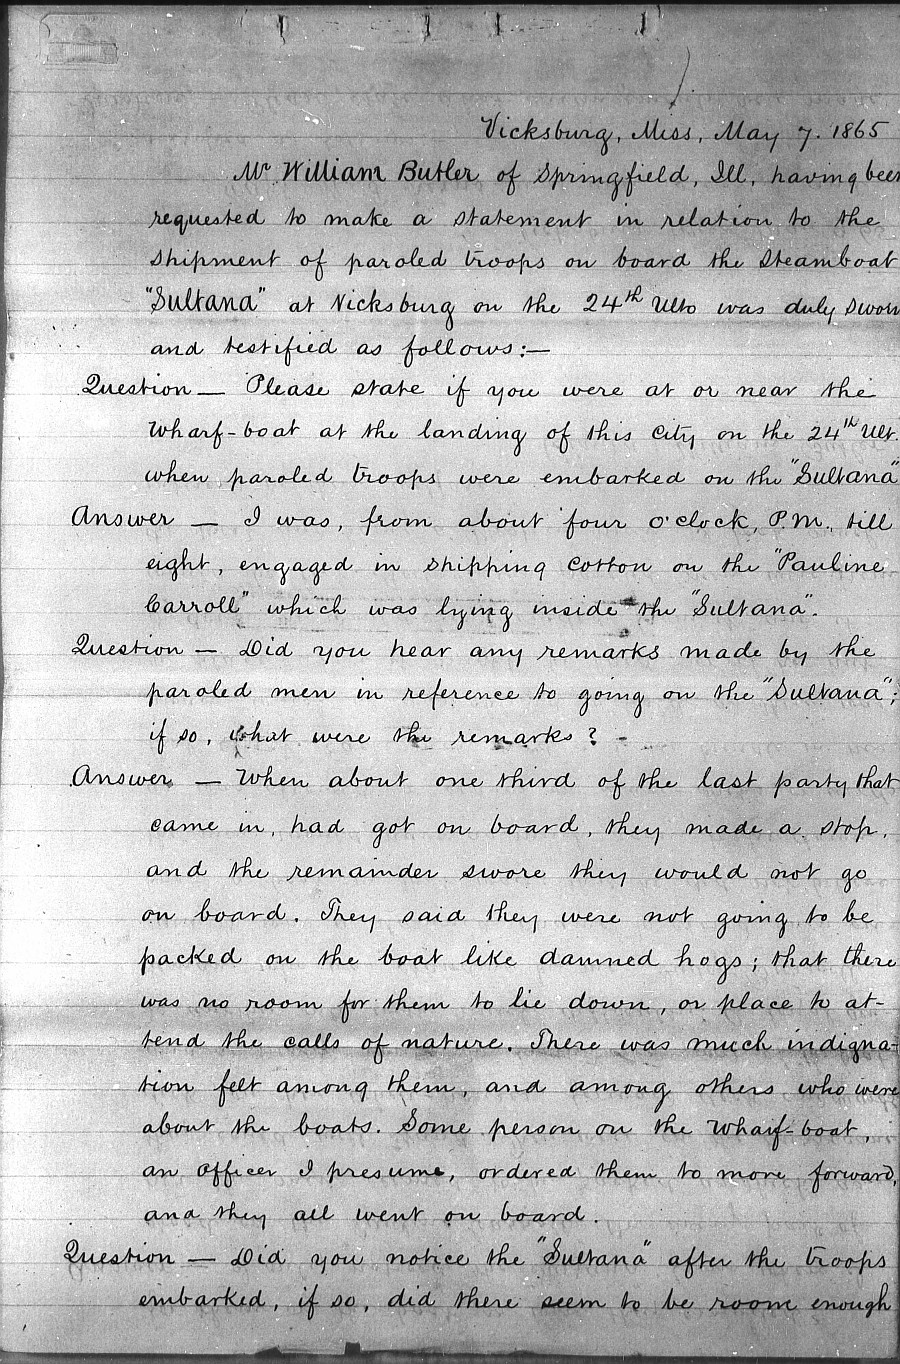 Testimony-of-William-Butler-a-cook-aboard-the-SS-Sultana-given-to-the Washburn-Committee-1